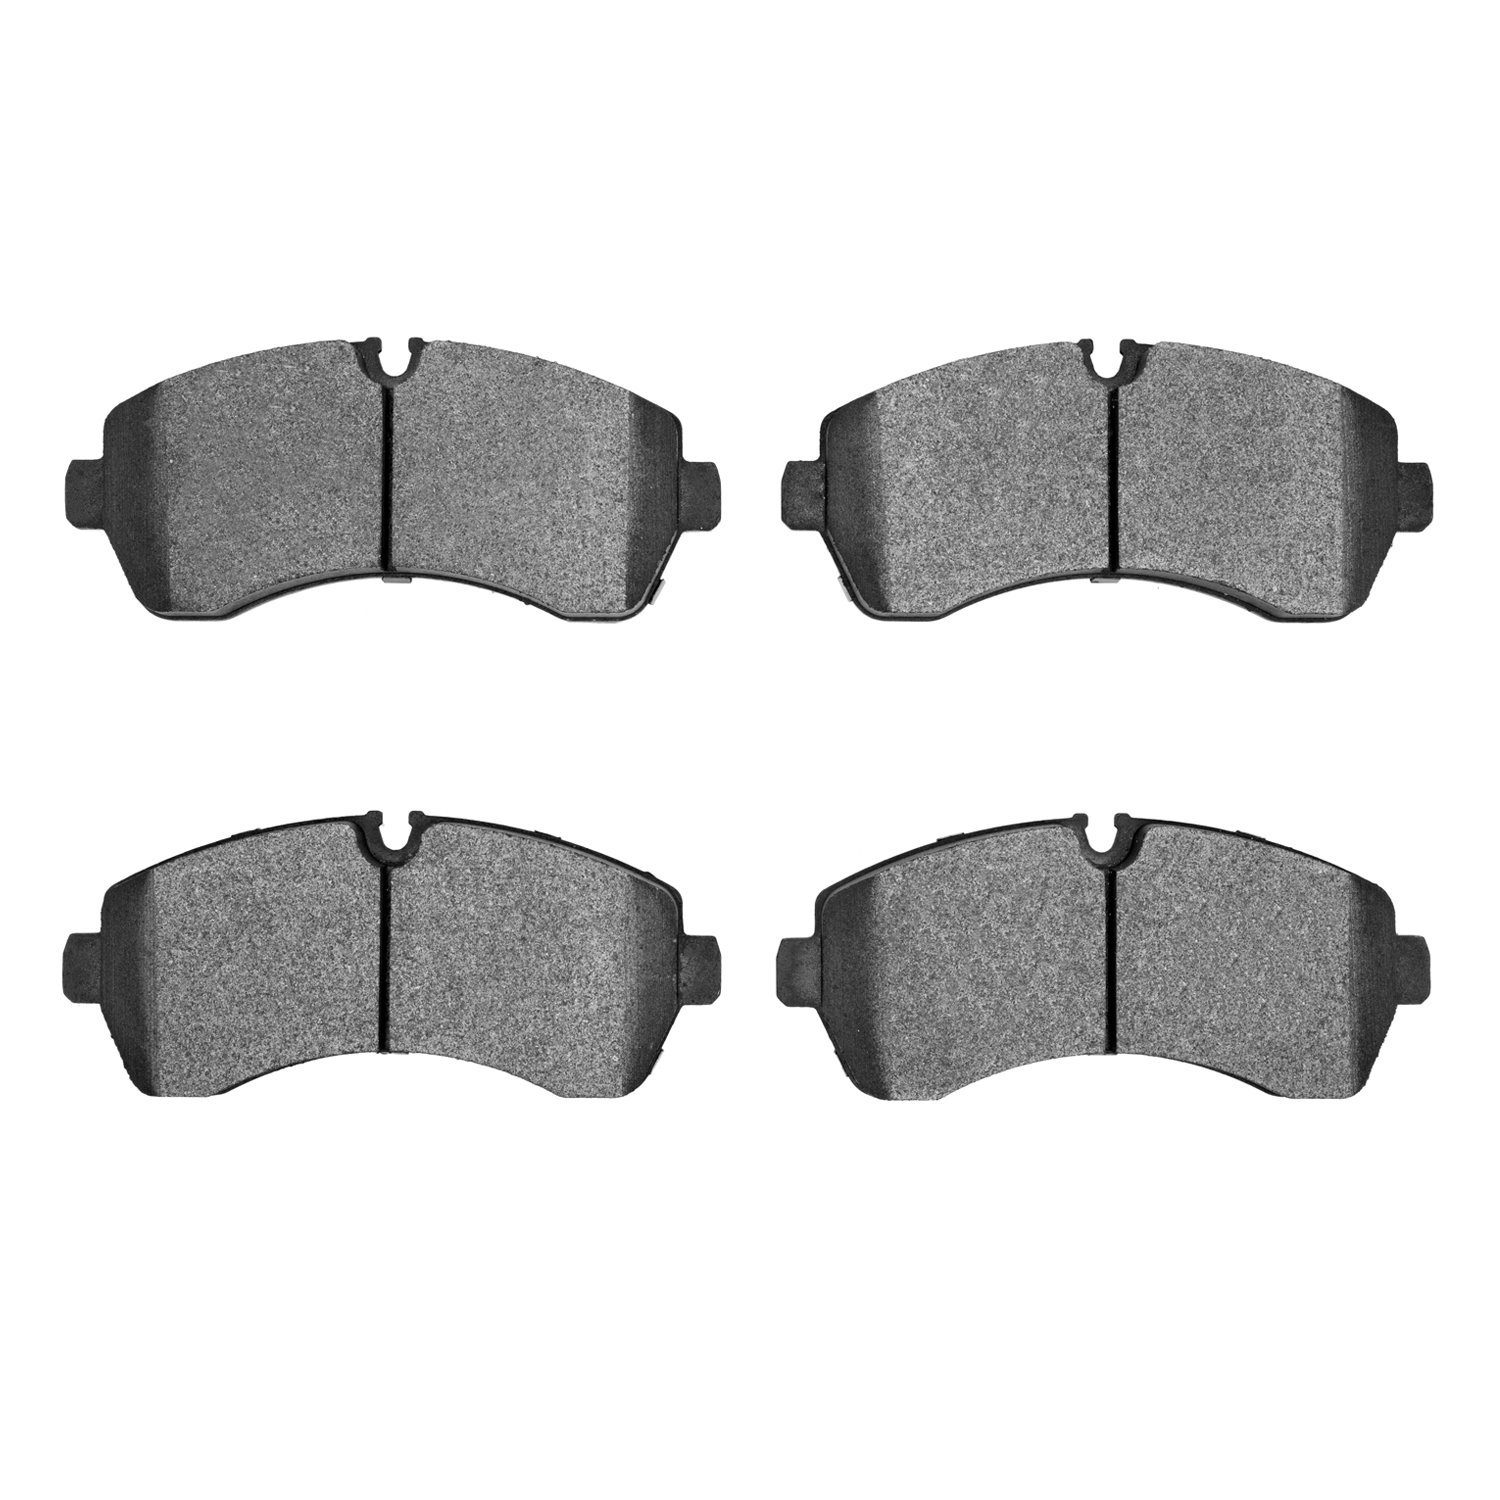 Semi-Metallic Brake Pads, Fits Select Fits Multiple Makes/Models, Position: Front & Rear